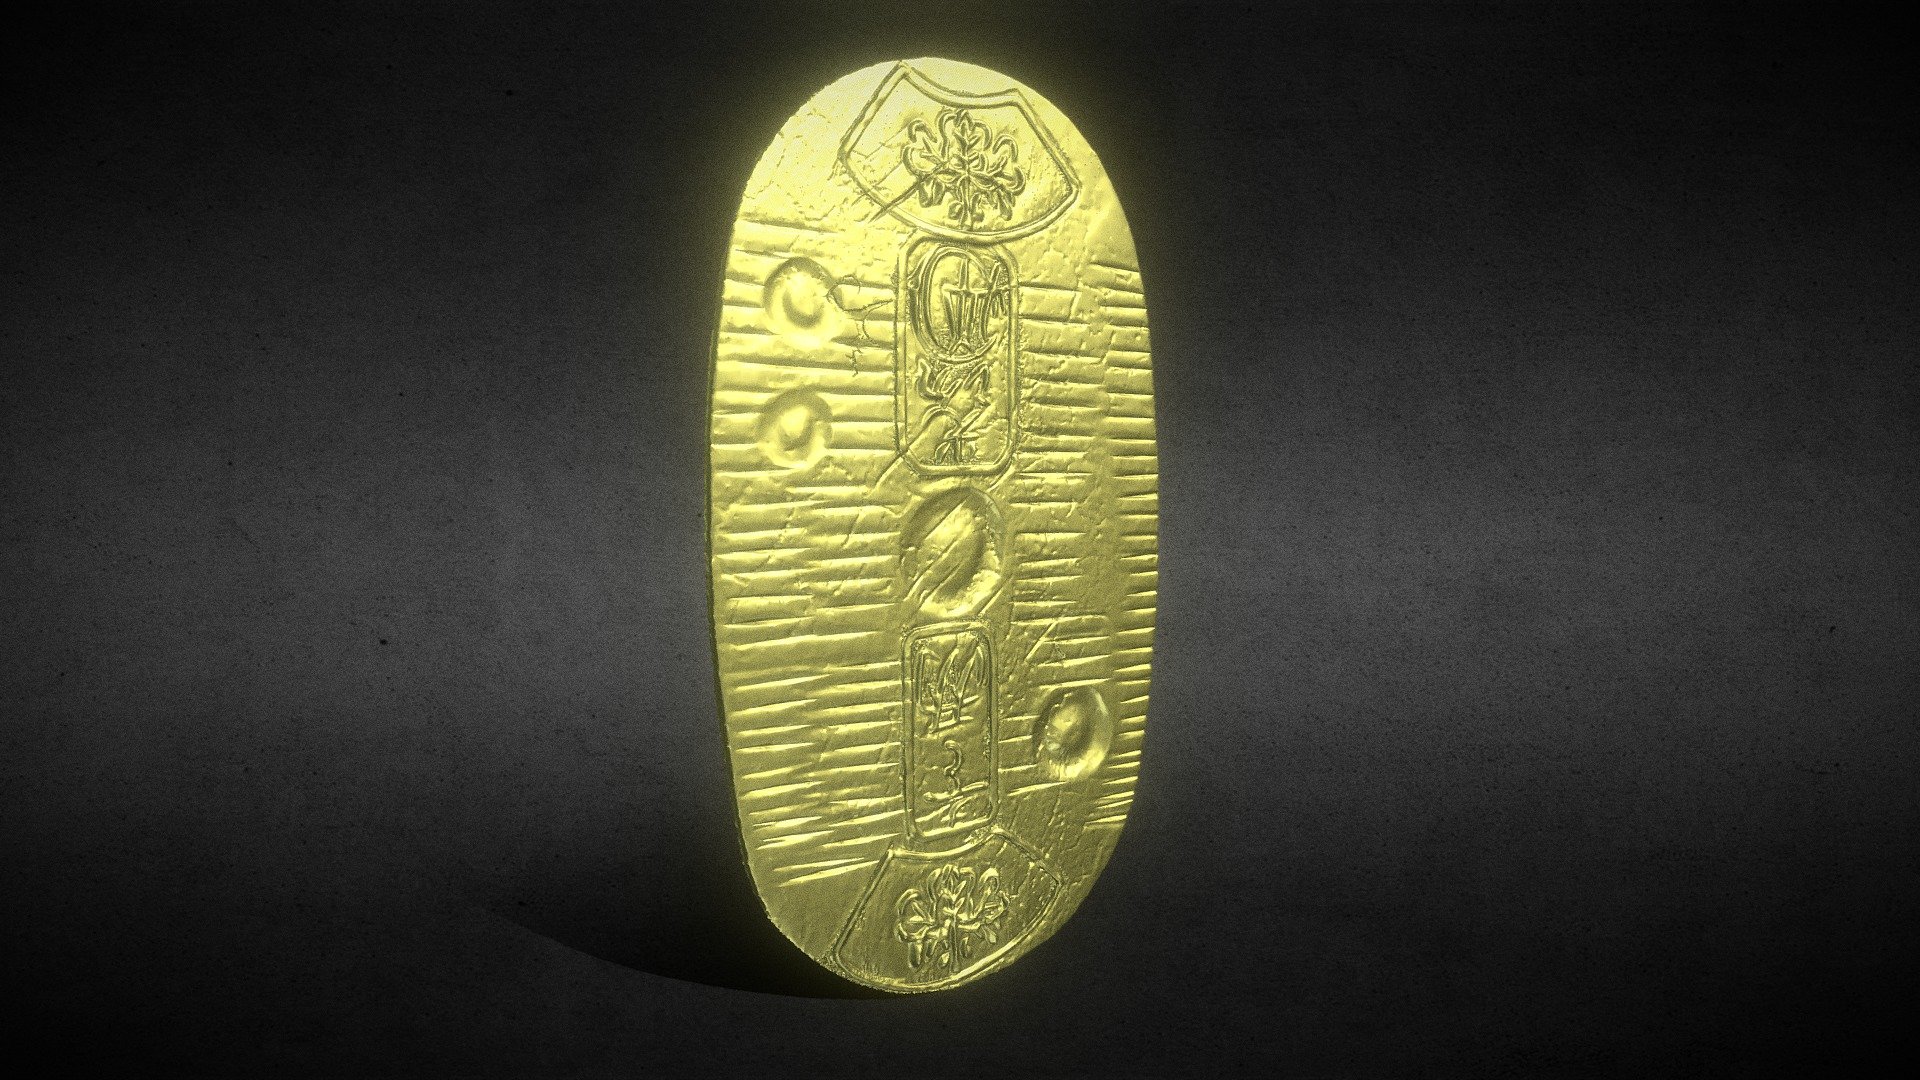 A Gold Coin Koban an old Japanese Coin made with ZBrush and ready for 3D Print I included the OBJ, STL, and ZBrush Tool if you need 3D Game Assets or STL files I, can do commission works 3d model